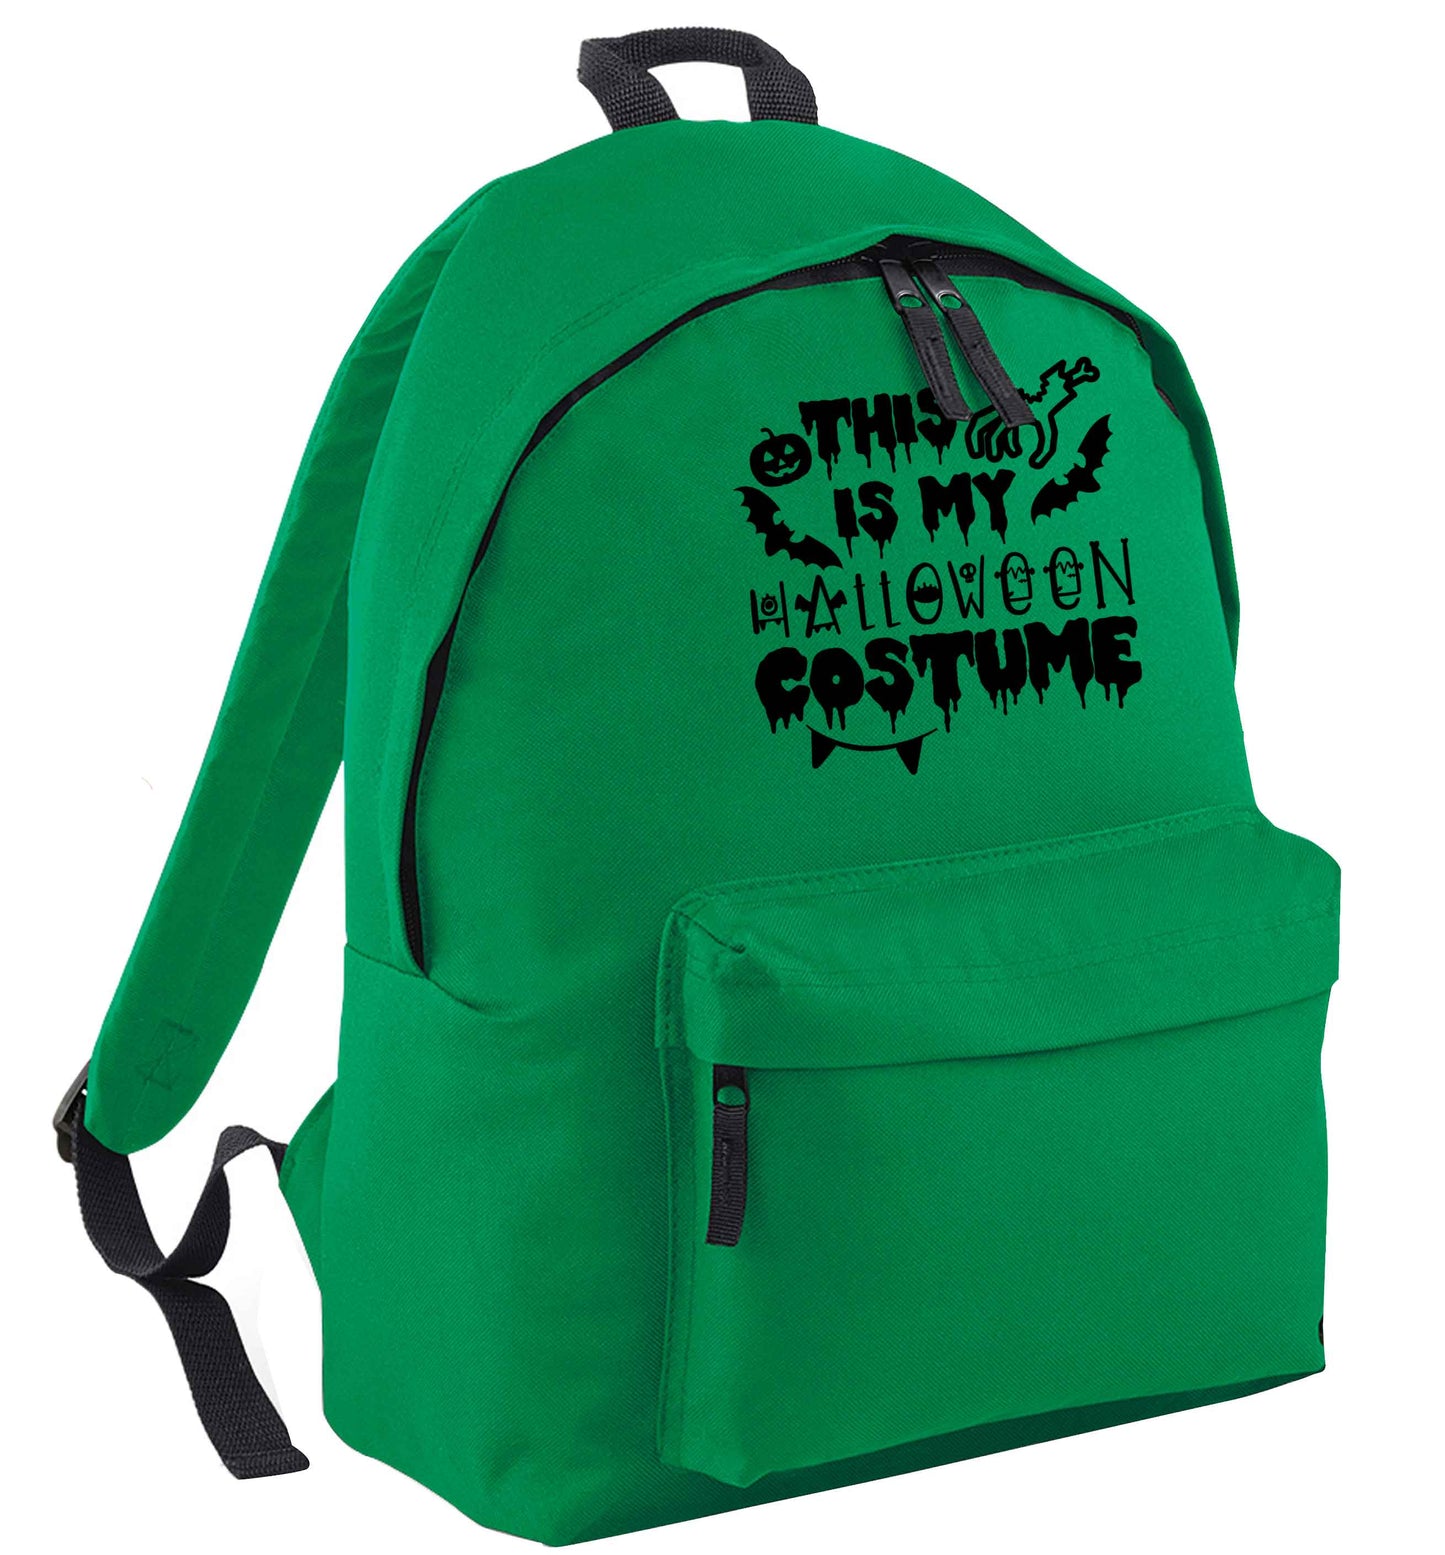 This is my halloween costume green adults backpack